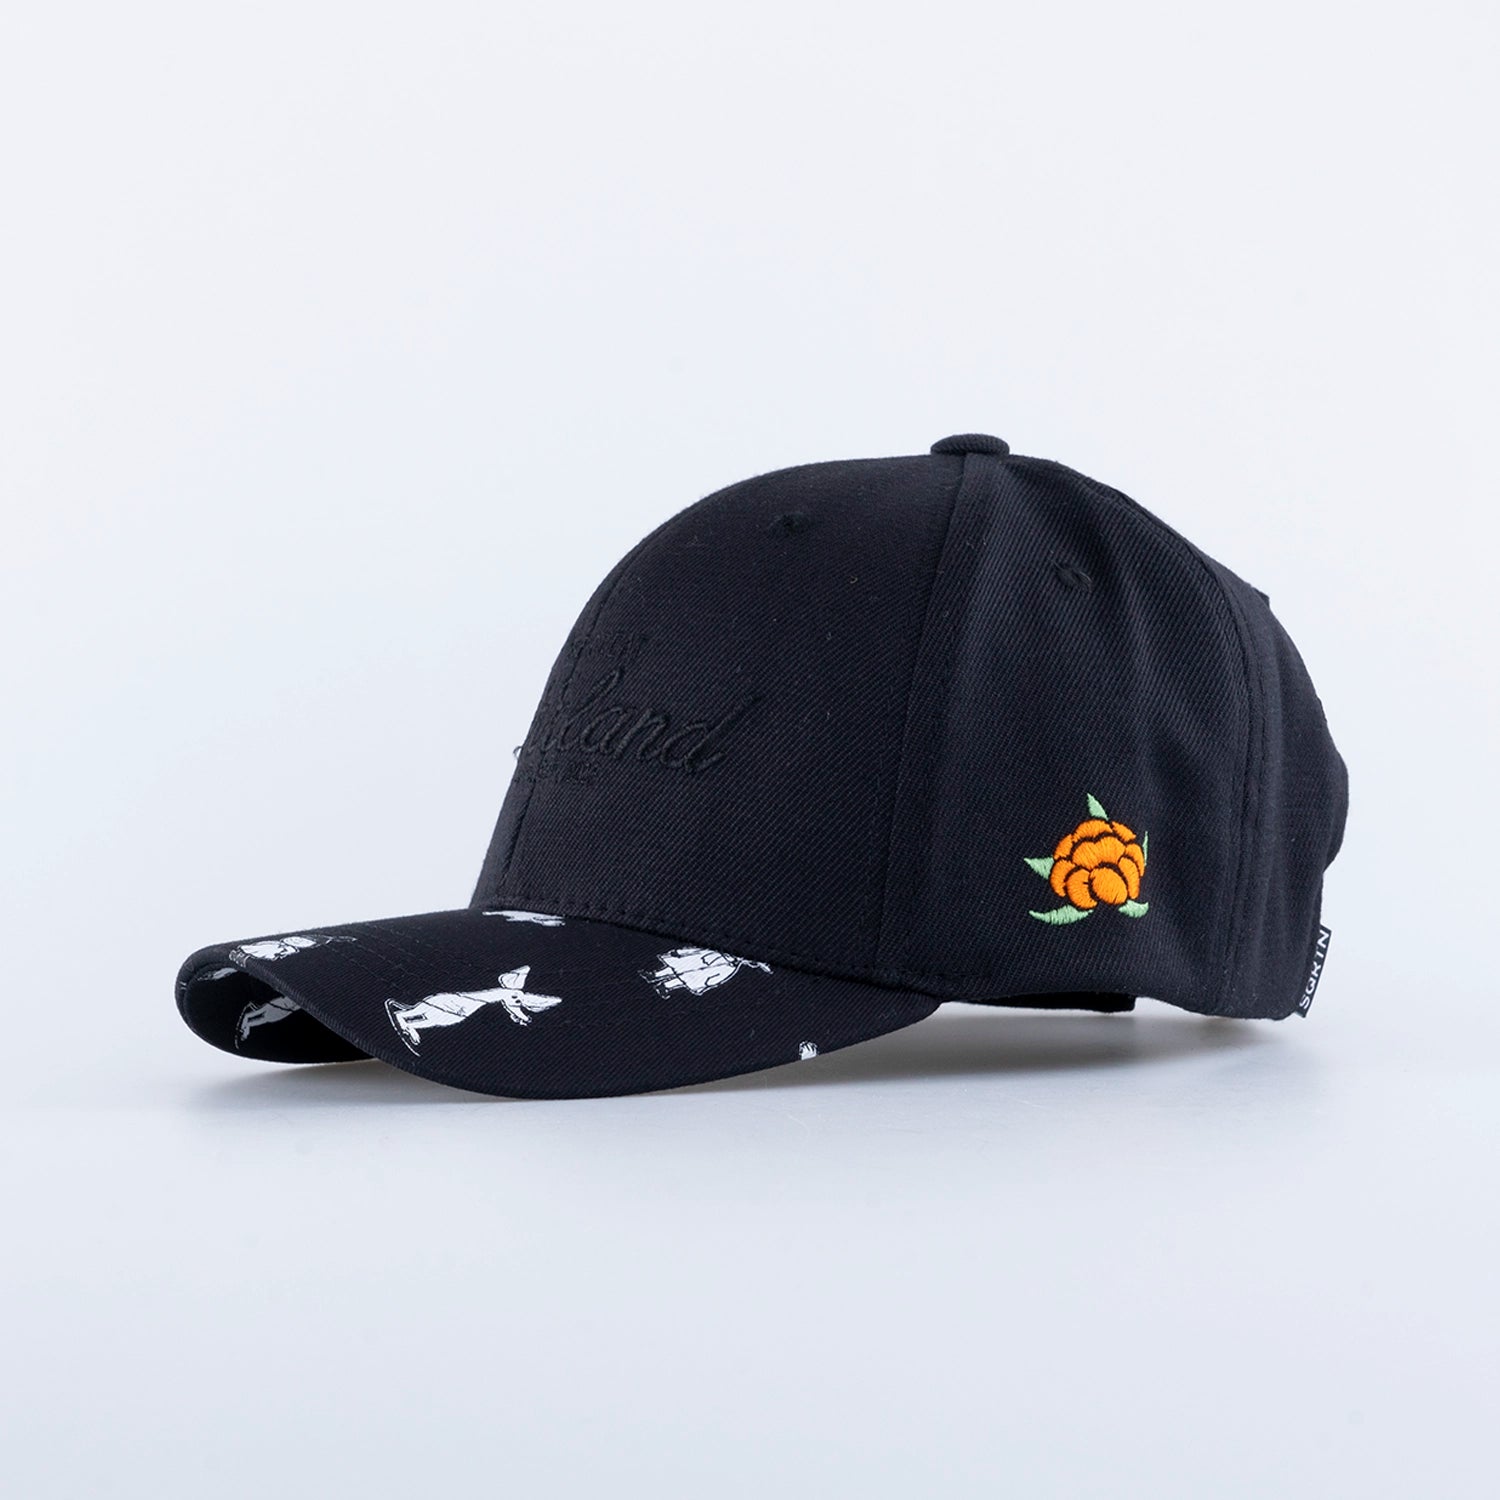 GREAT NORRLAND KIDS CAP  - HOOKED MUMIN ALL BLACK